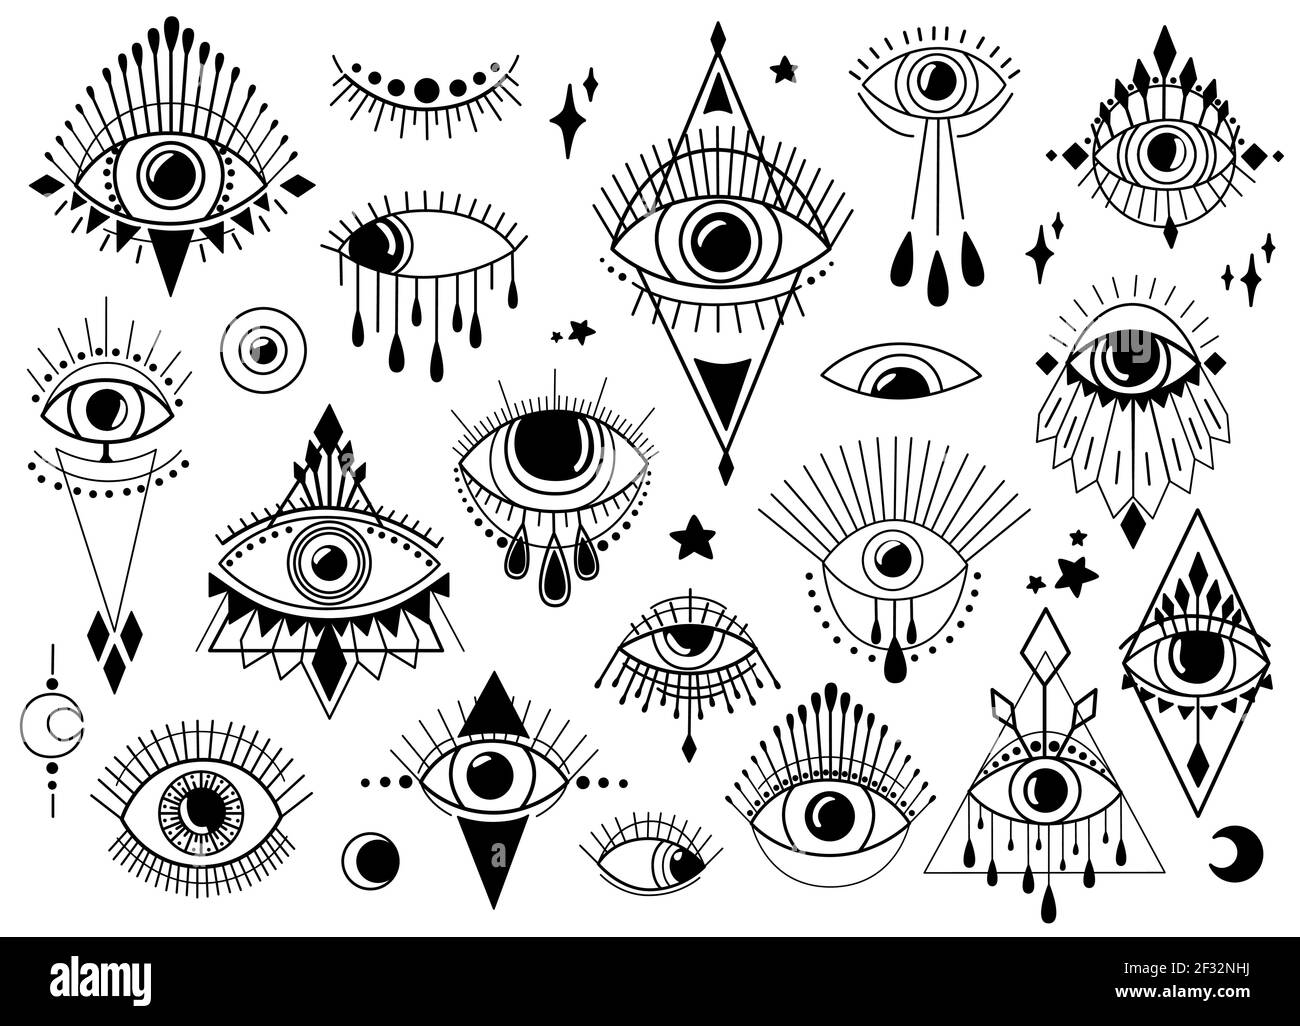 Premium Vector  Set of hamsa symbol with evil eye protection sign mystic  decorative pattern in oriental style